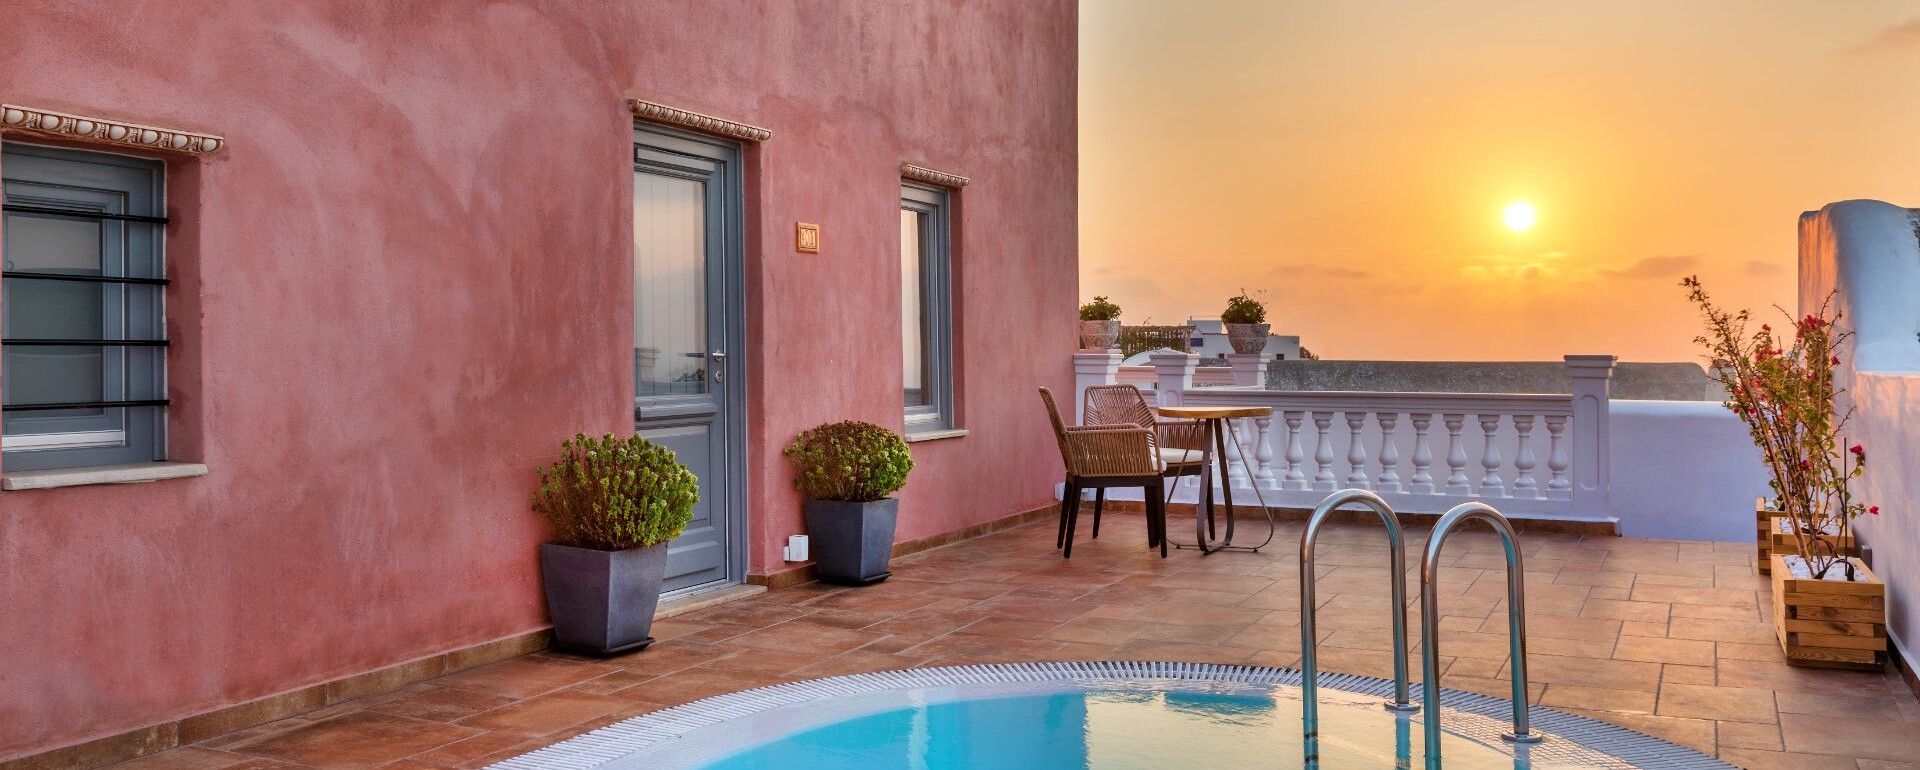 Incredible sunset views from Tramonto Secret Villas, part of our Santorini luxury hotels